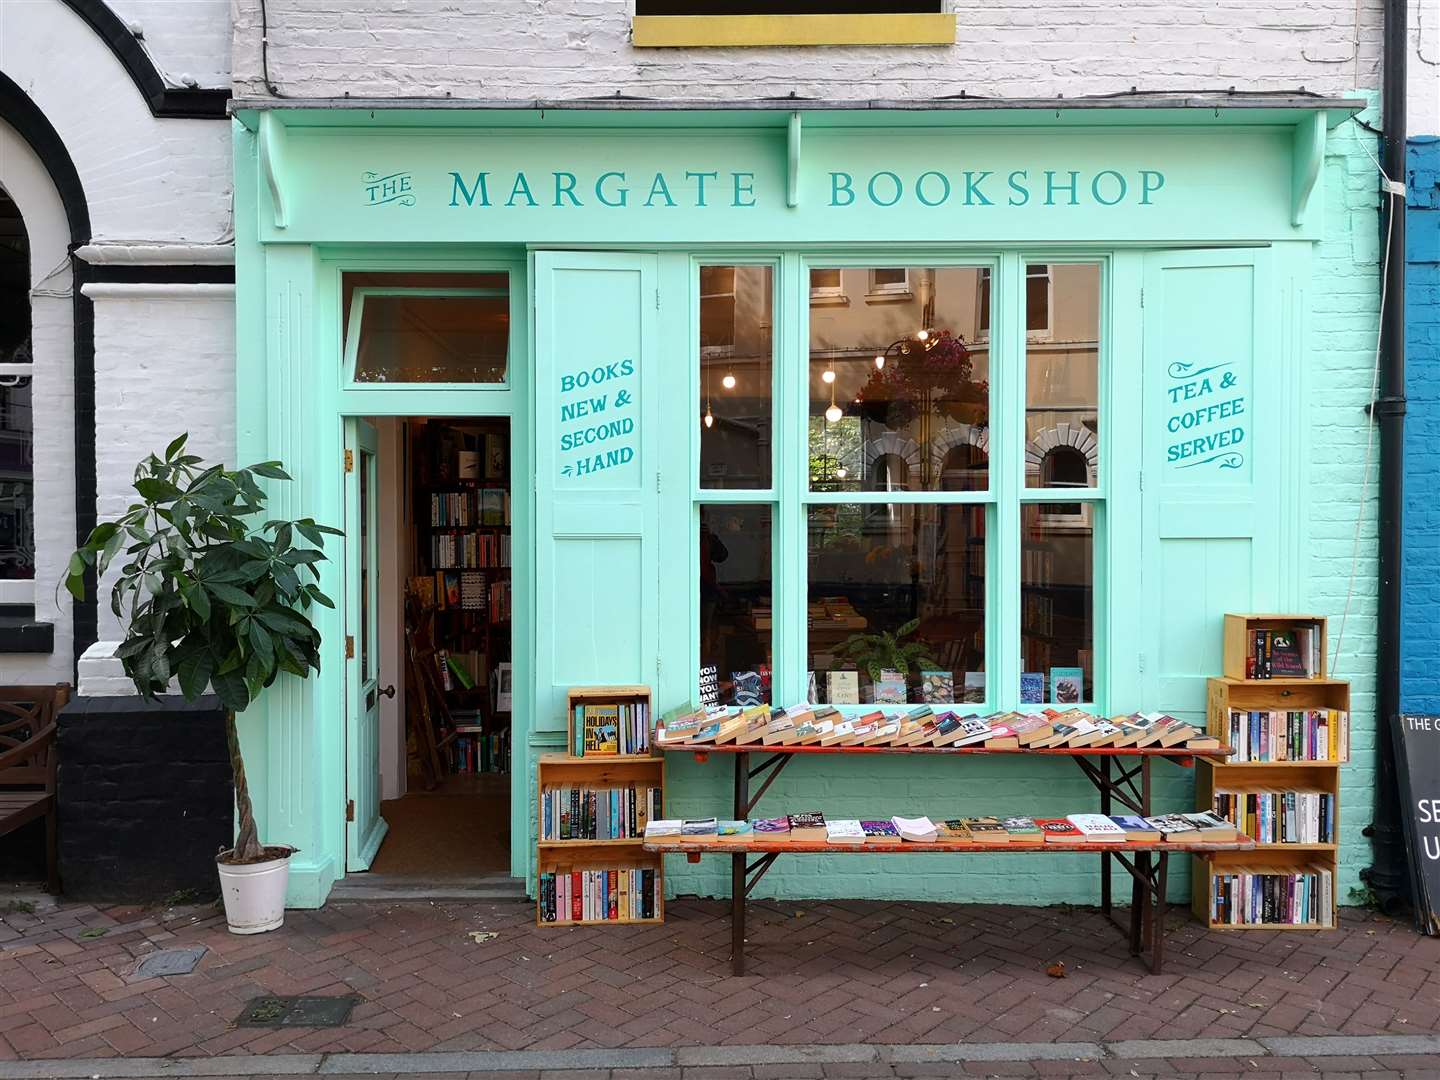 Stop off for a tea or coffee at the Margate Bookshop